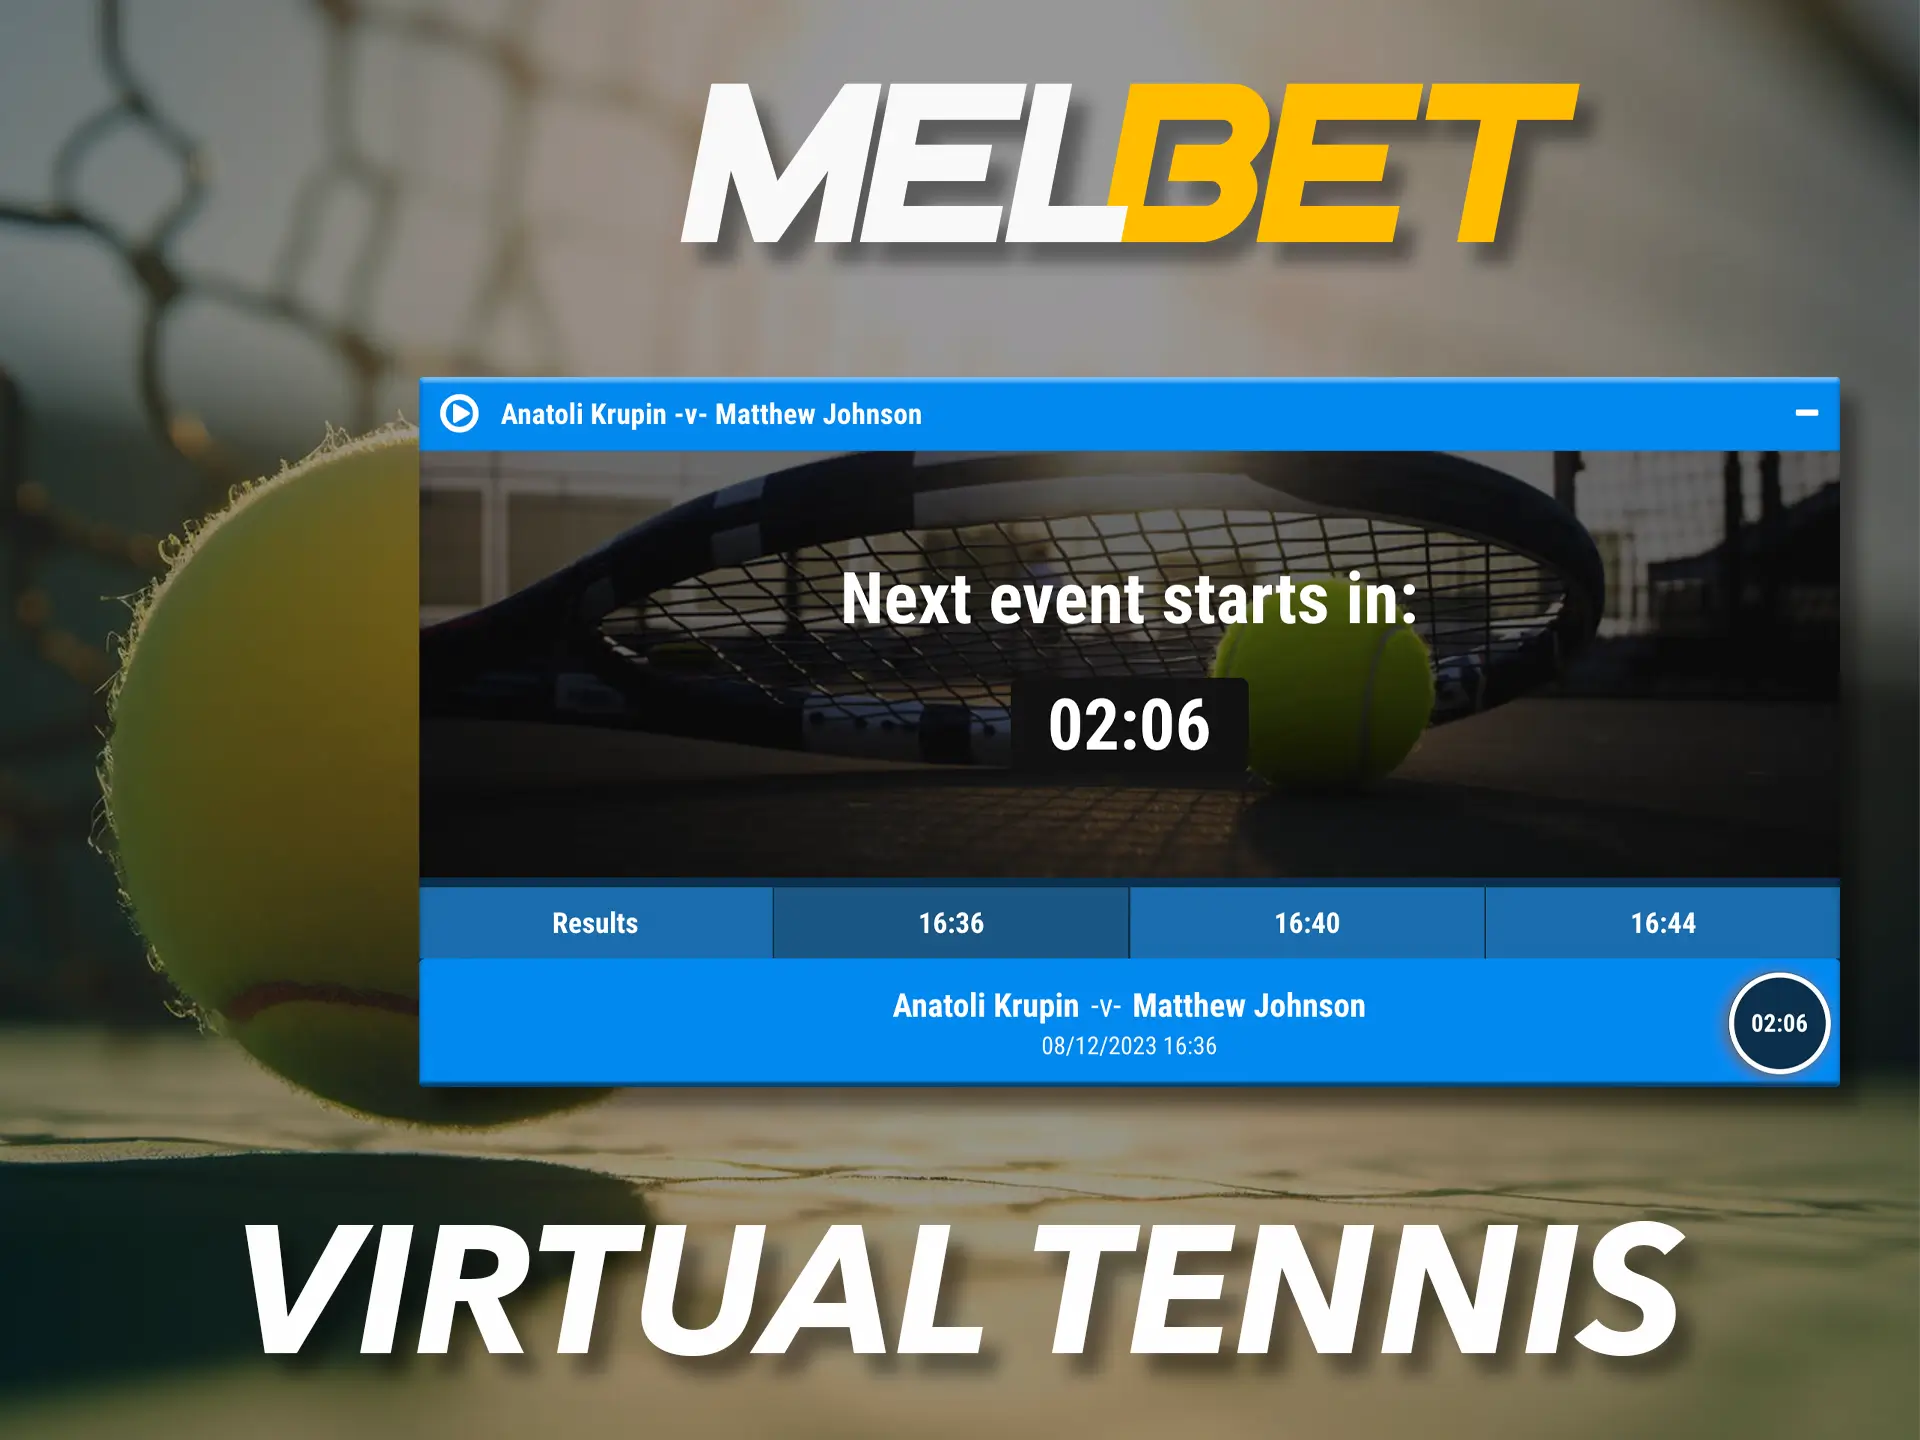 Virtual tennis at Melbet is similar to real tennis, with the same choice of players and tournaments.